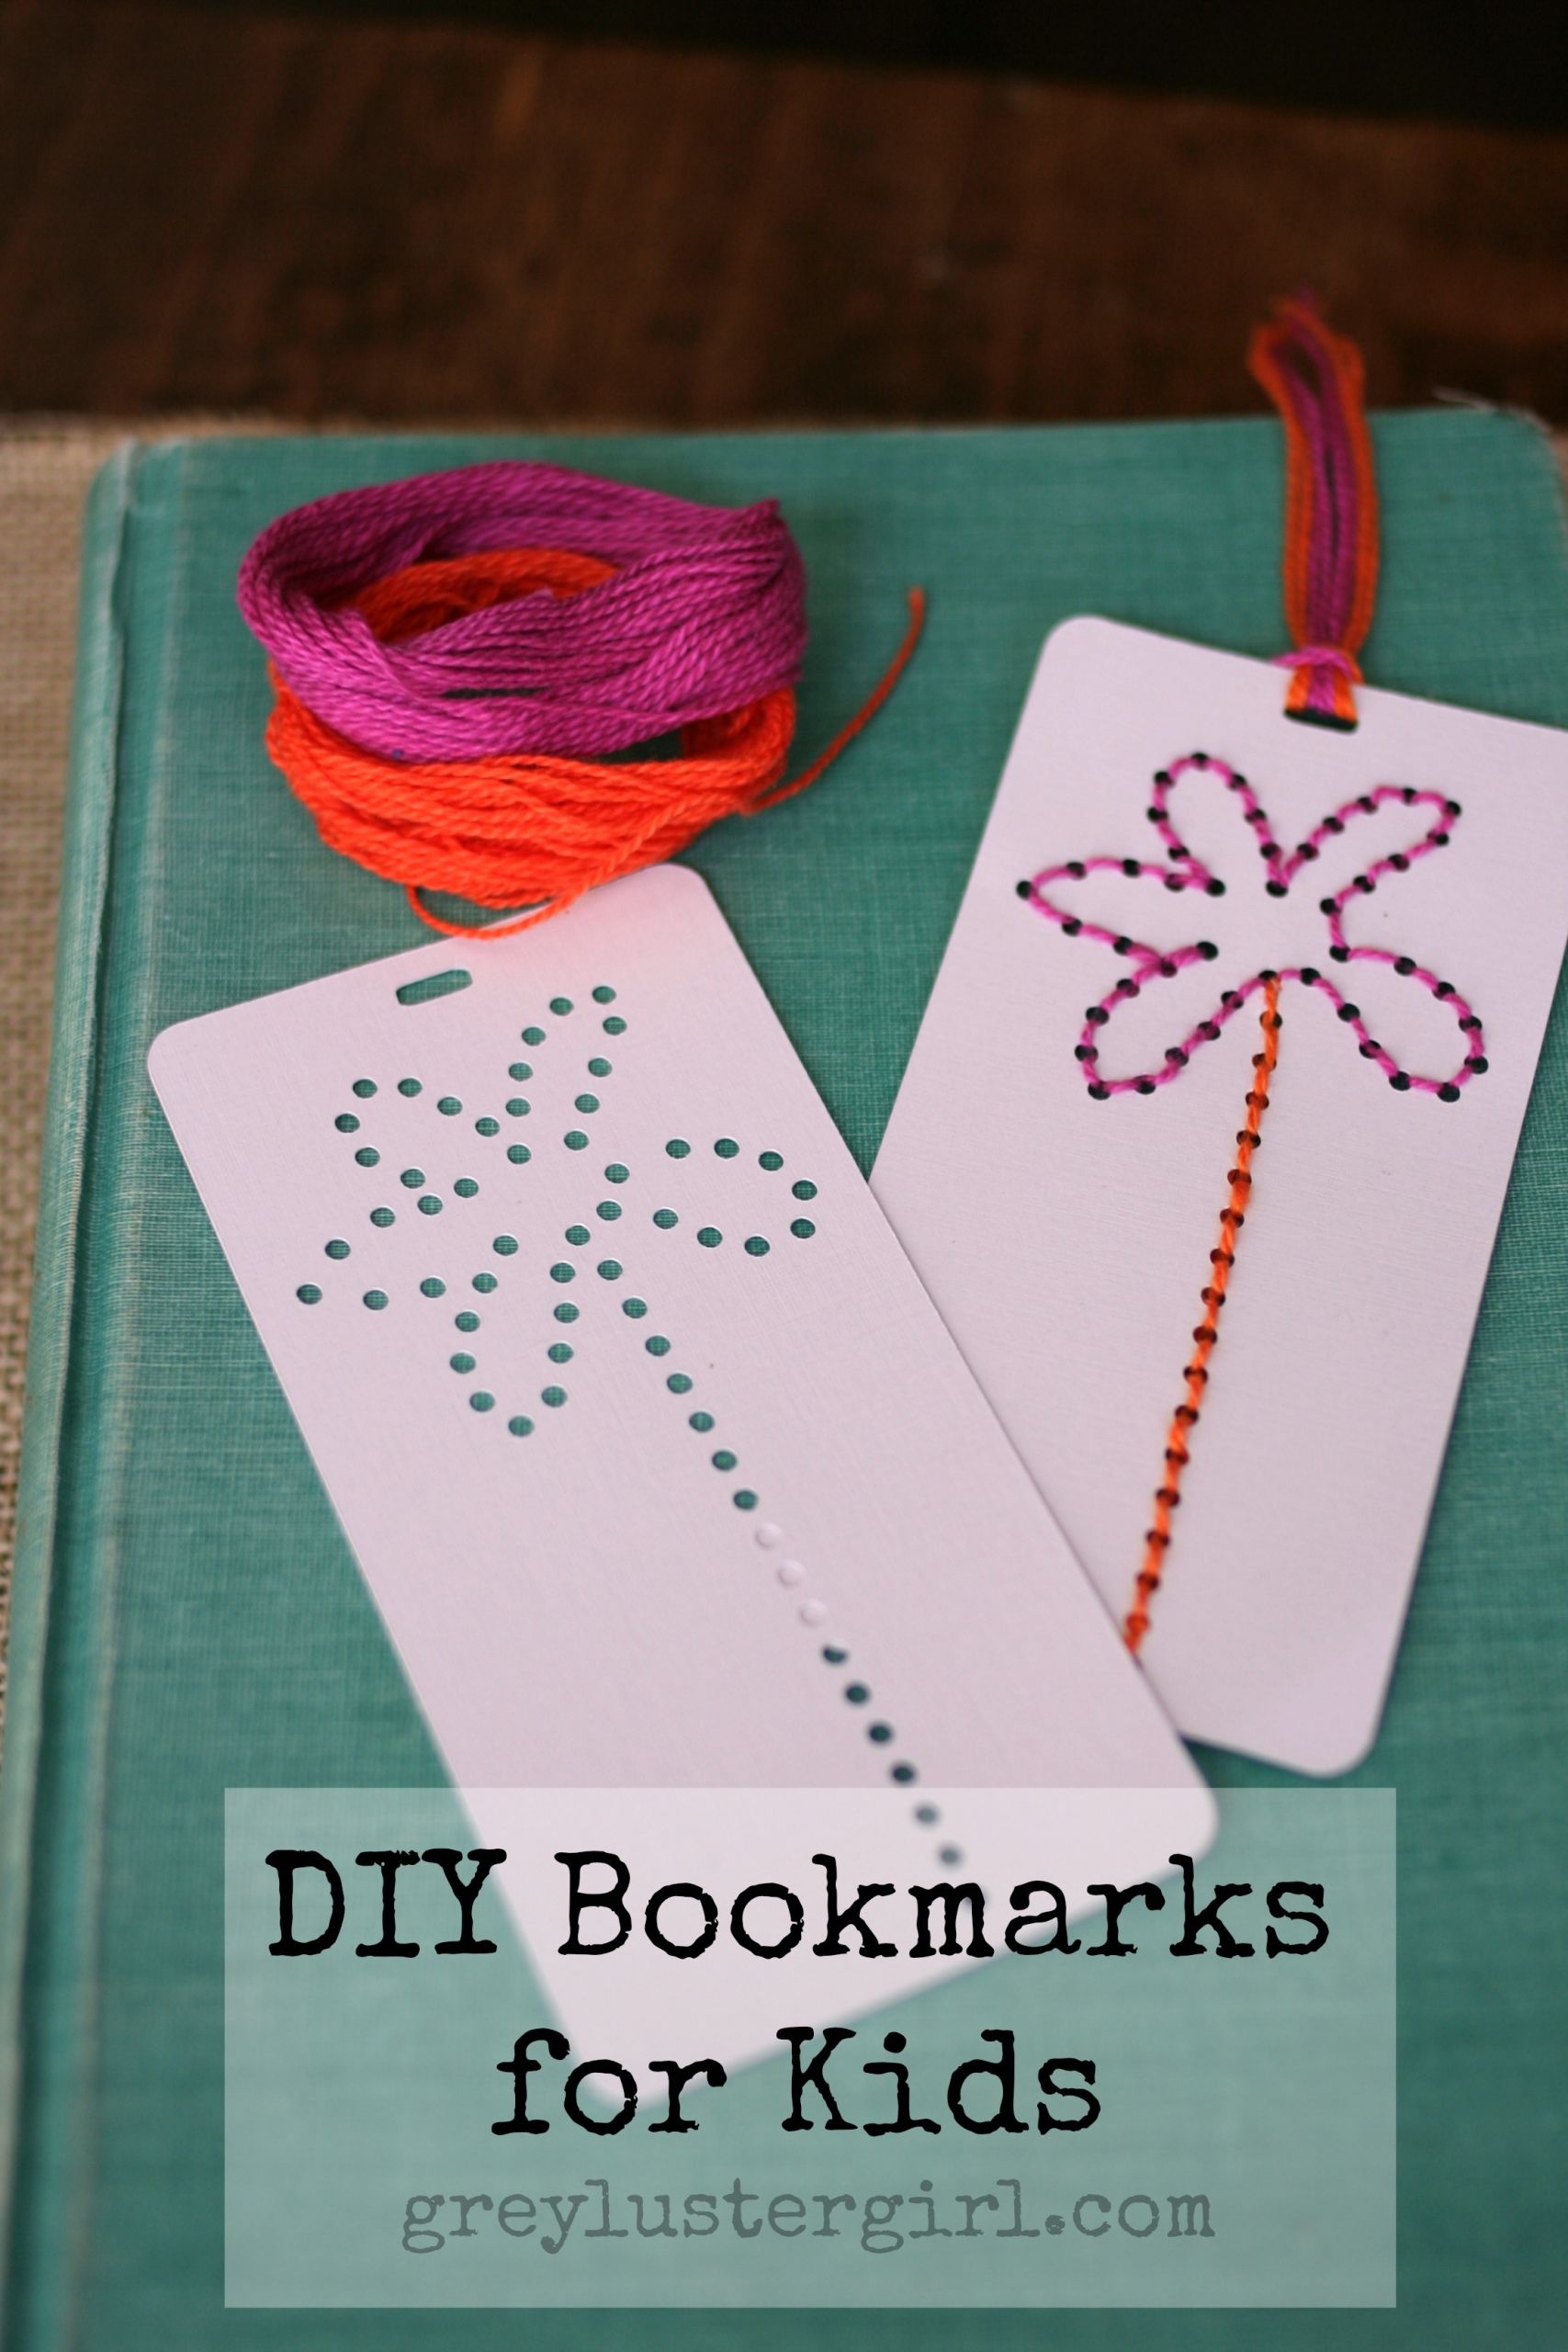 DIY Bookmarks For Kids
 Hand Stitched Bookmarks for Kids